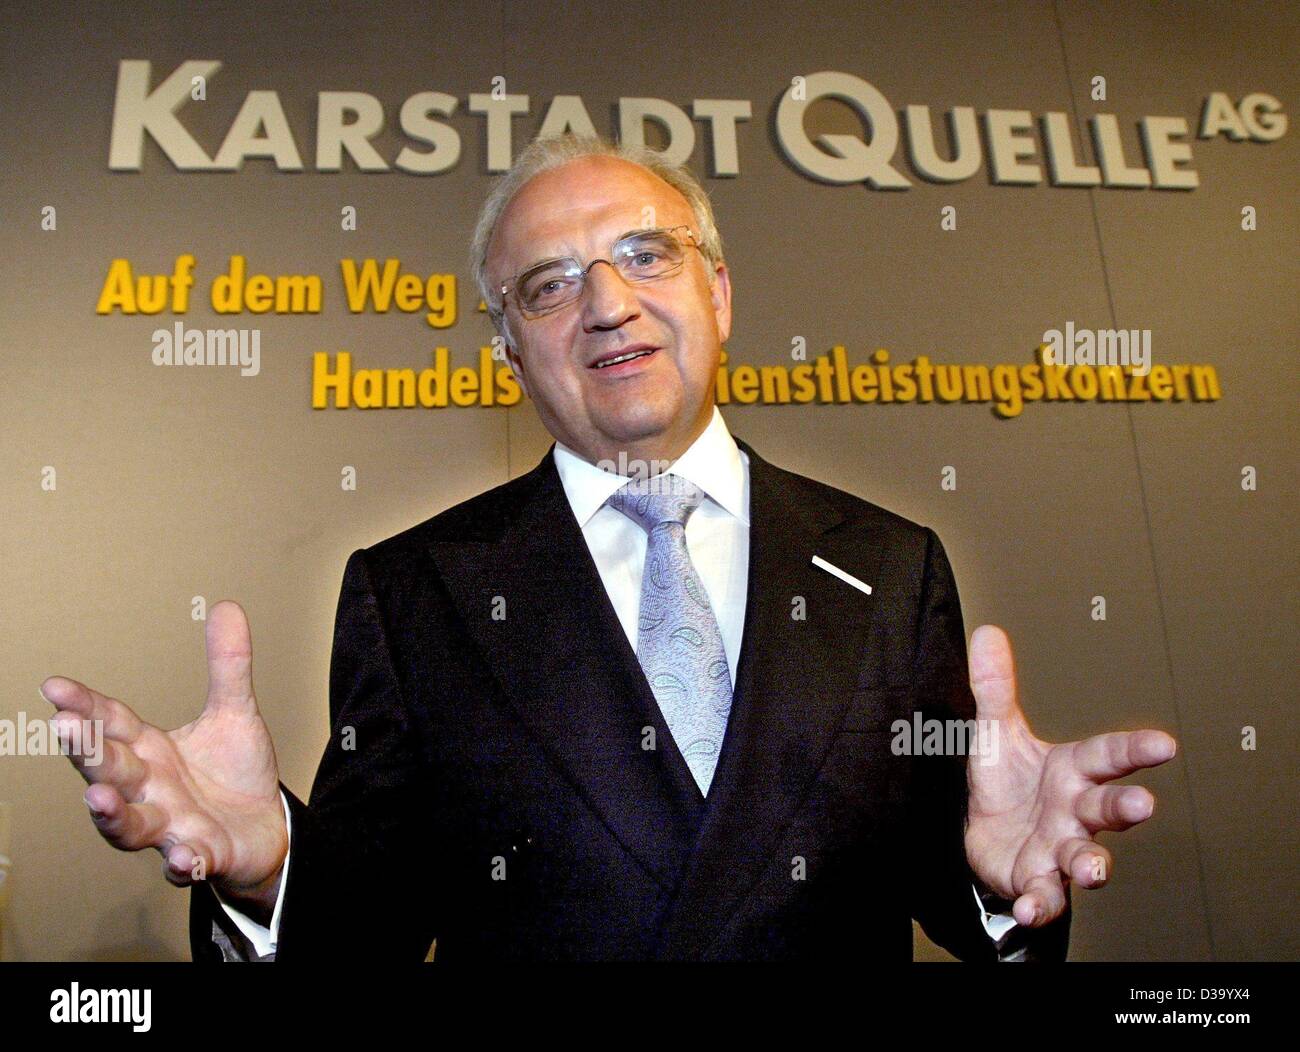 (dpa) - Wolfgang Urban, CEO of the German department store chain KarstadtQuelle, presents the company's results at a press conference in Duesseldorf, Germany, 22 May 2002. Currently employees of the department stores Karstadt and the mail order business Quelle are fighting against the planned cancel Stock Photo